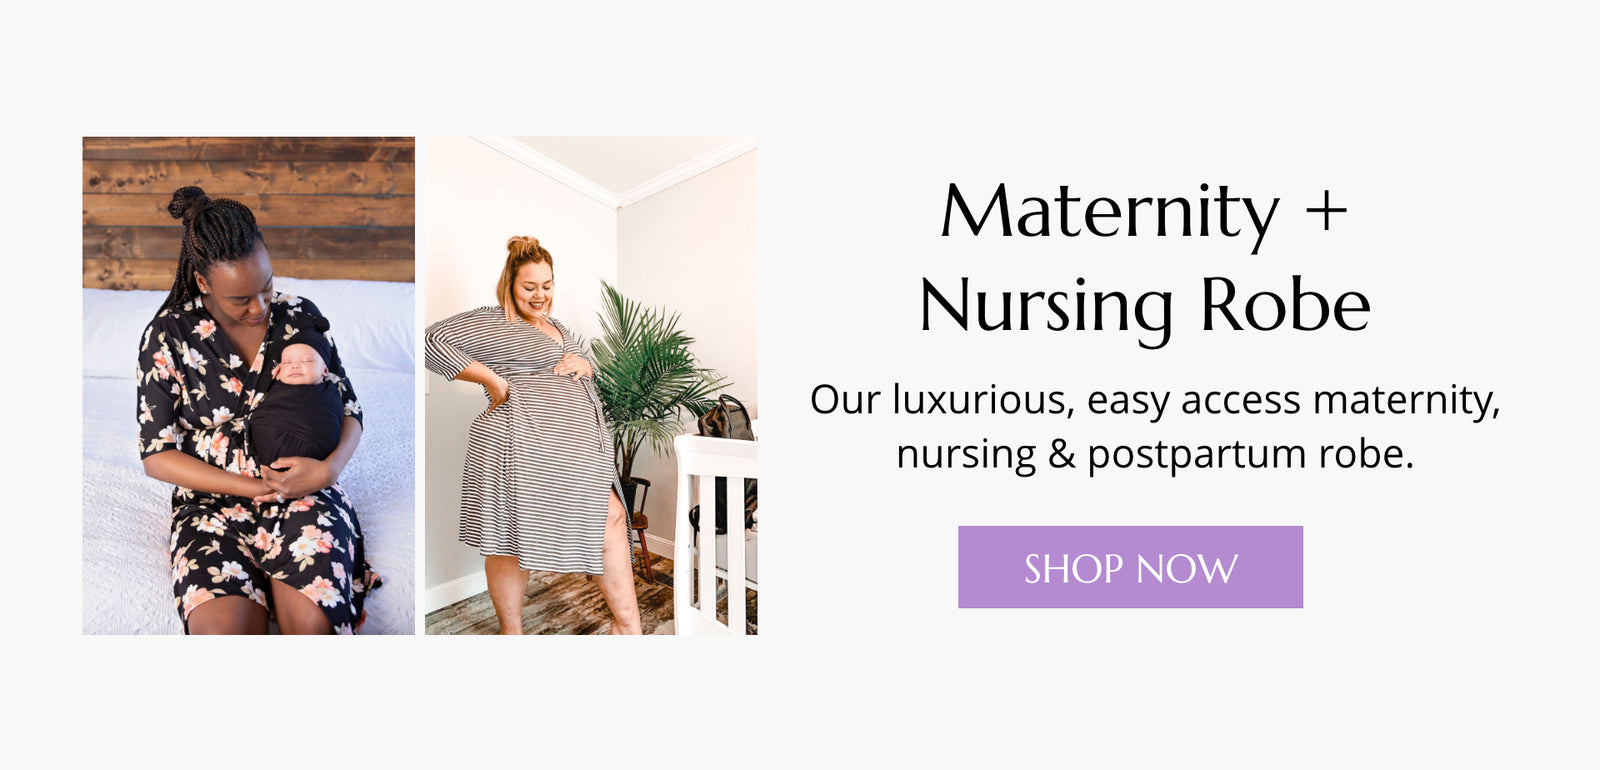 3 in 1 Maternity Labor Delivery Nursing Hospital Birthing Gown & Matching  Robe, Delivery Robe, Maternity Robe, Maternity Gown, Hospital Gown